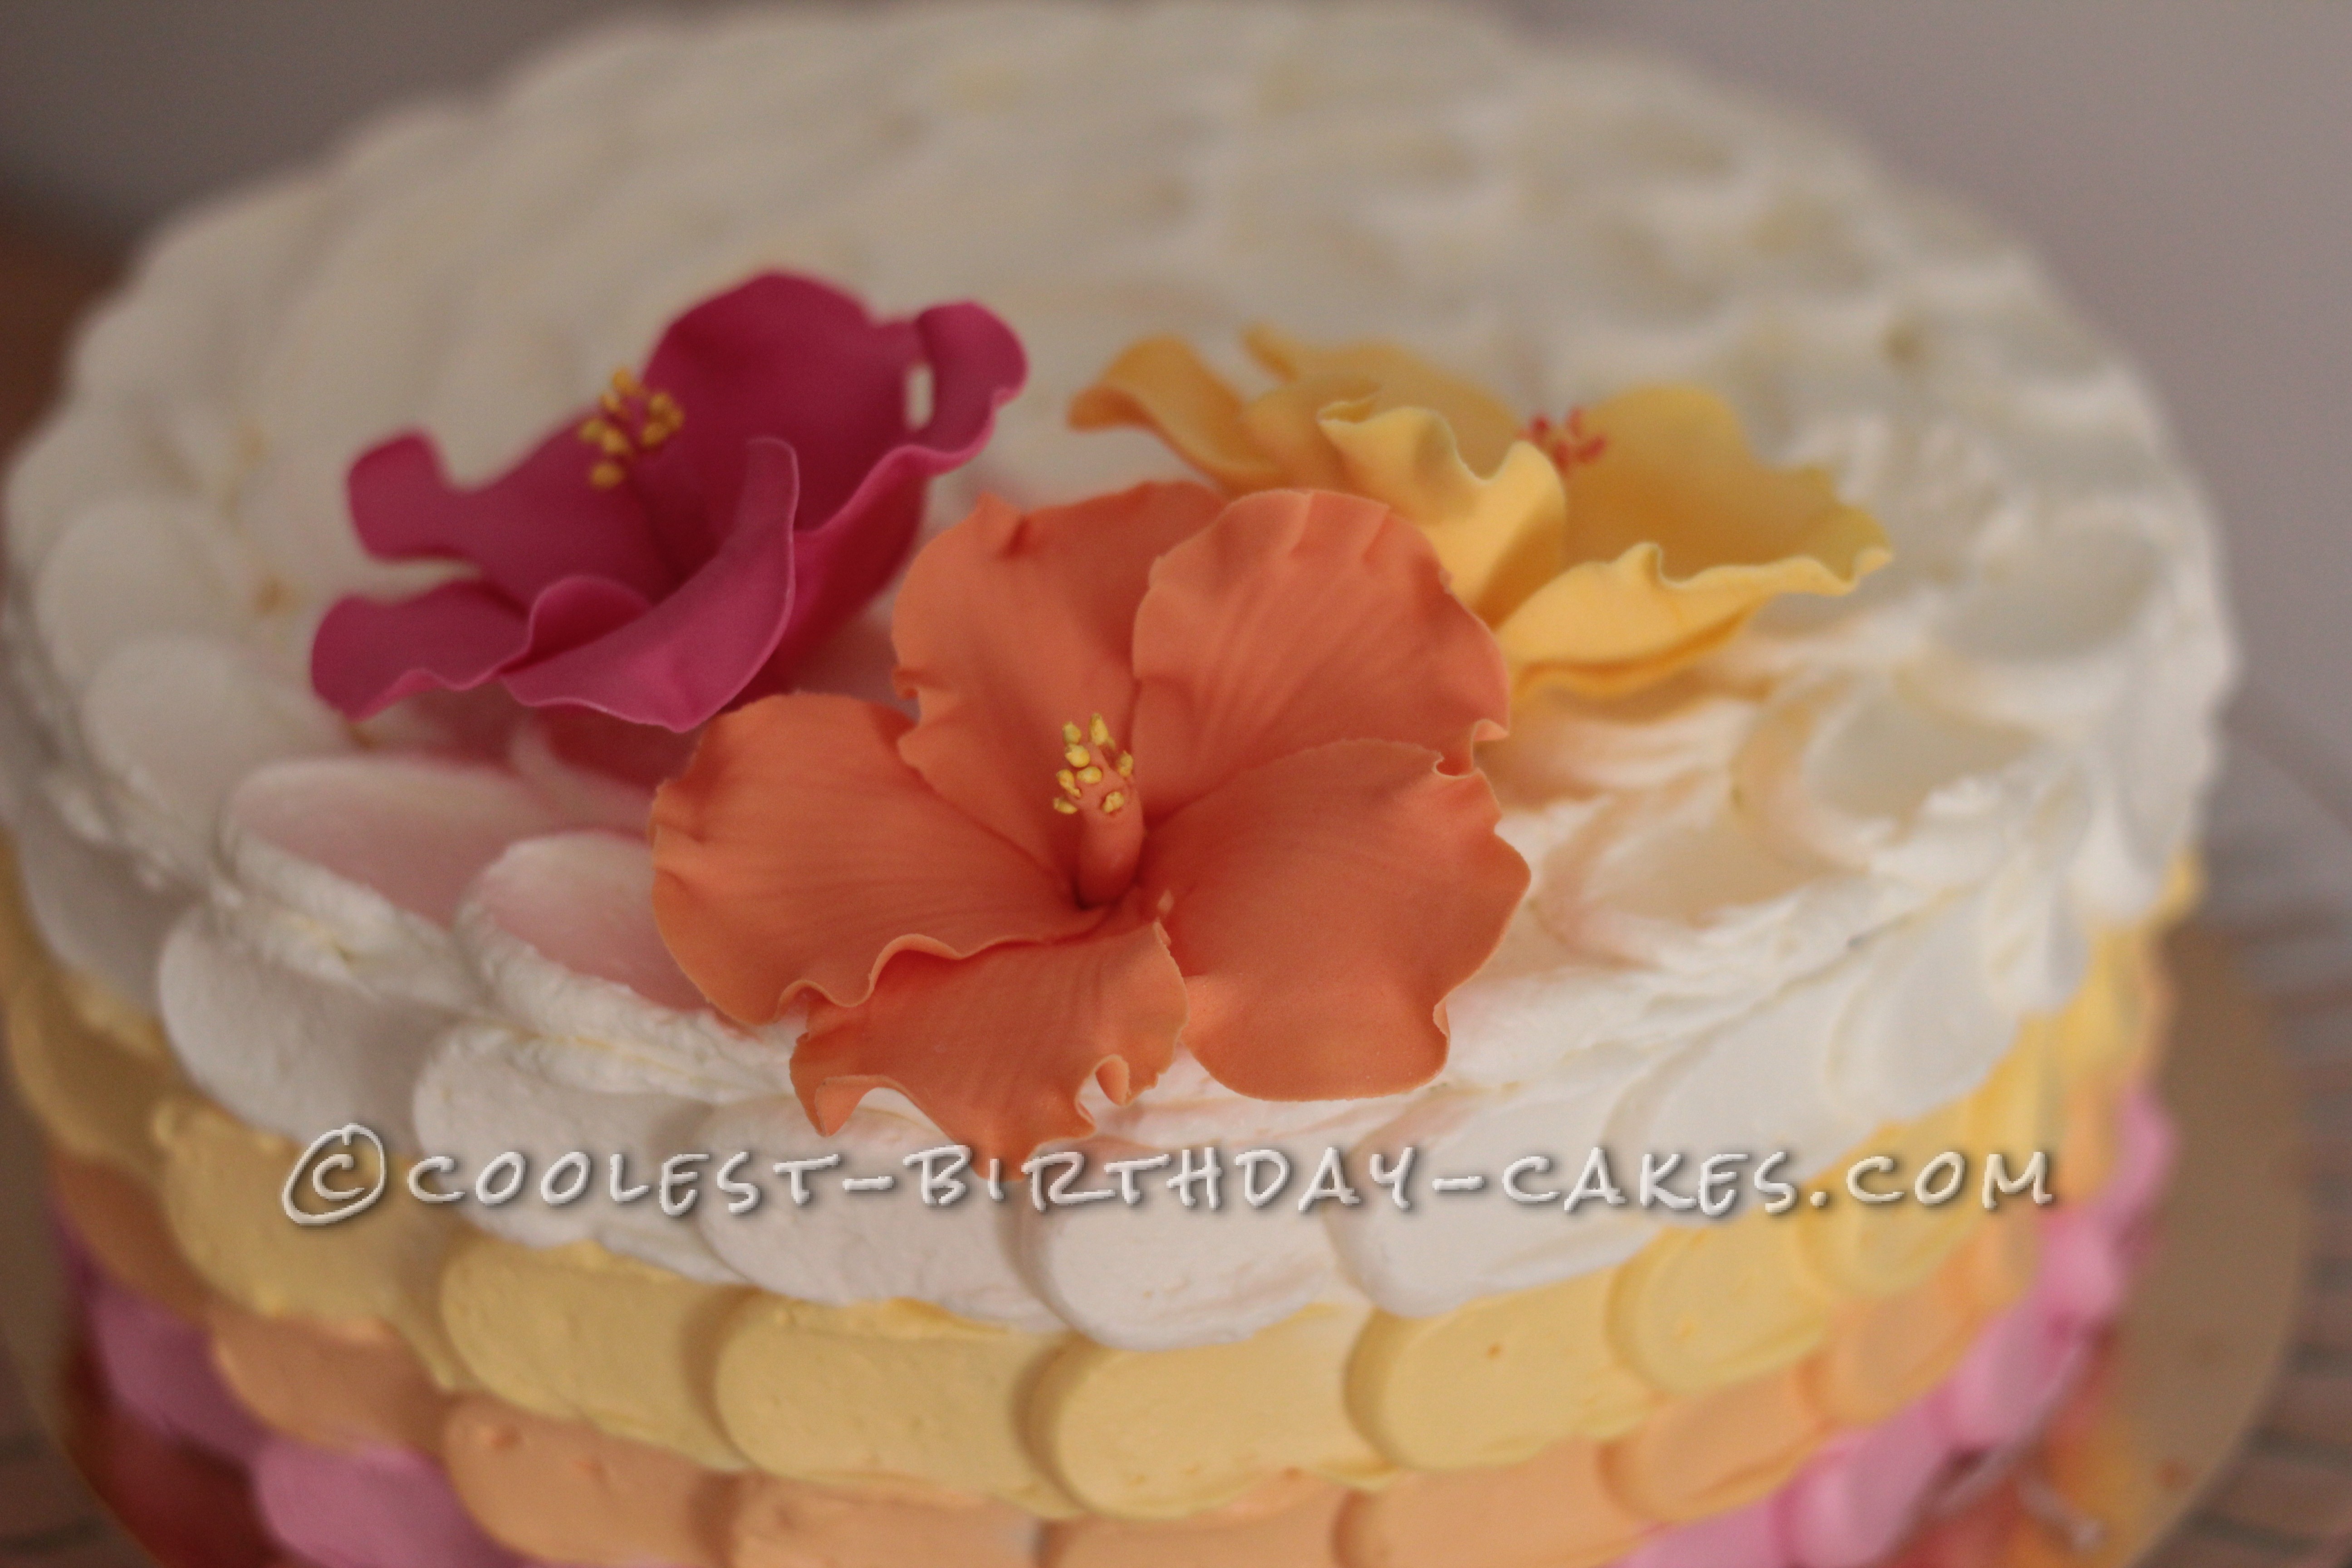 Hibiscus Cake for Luau party